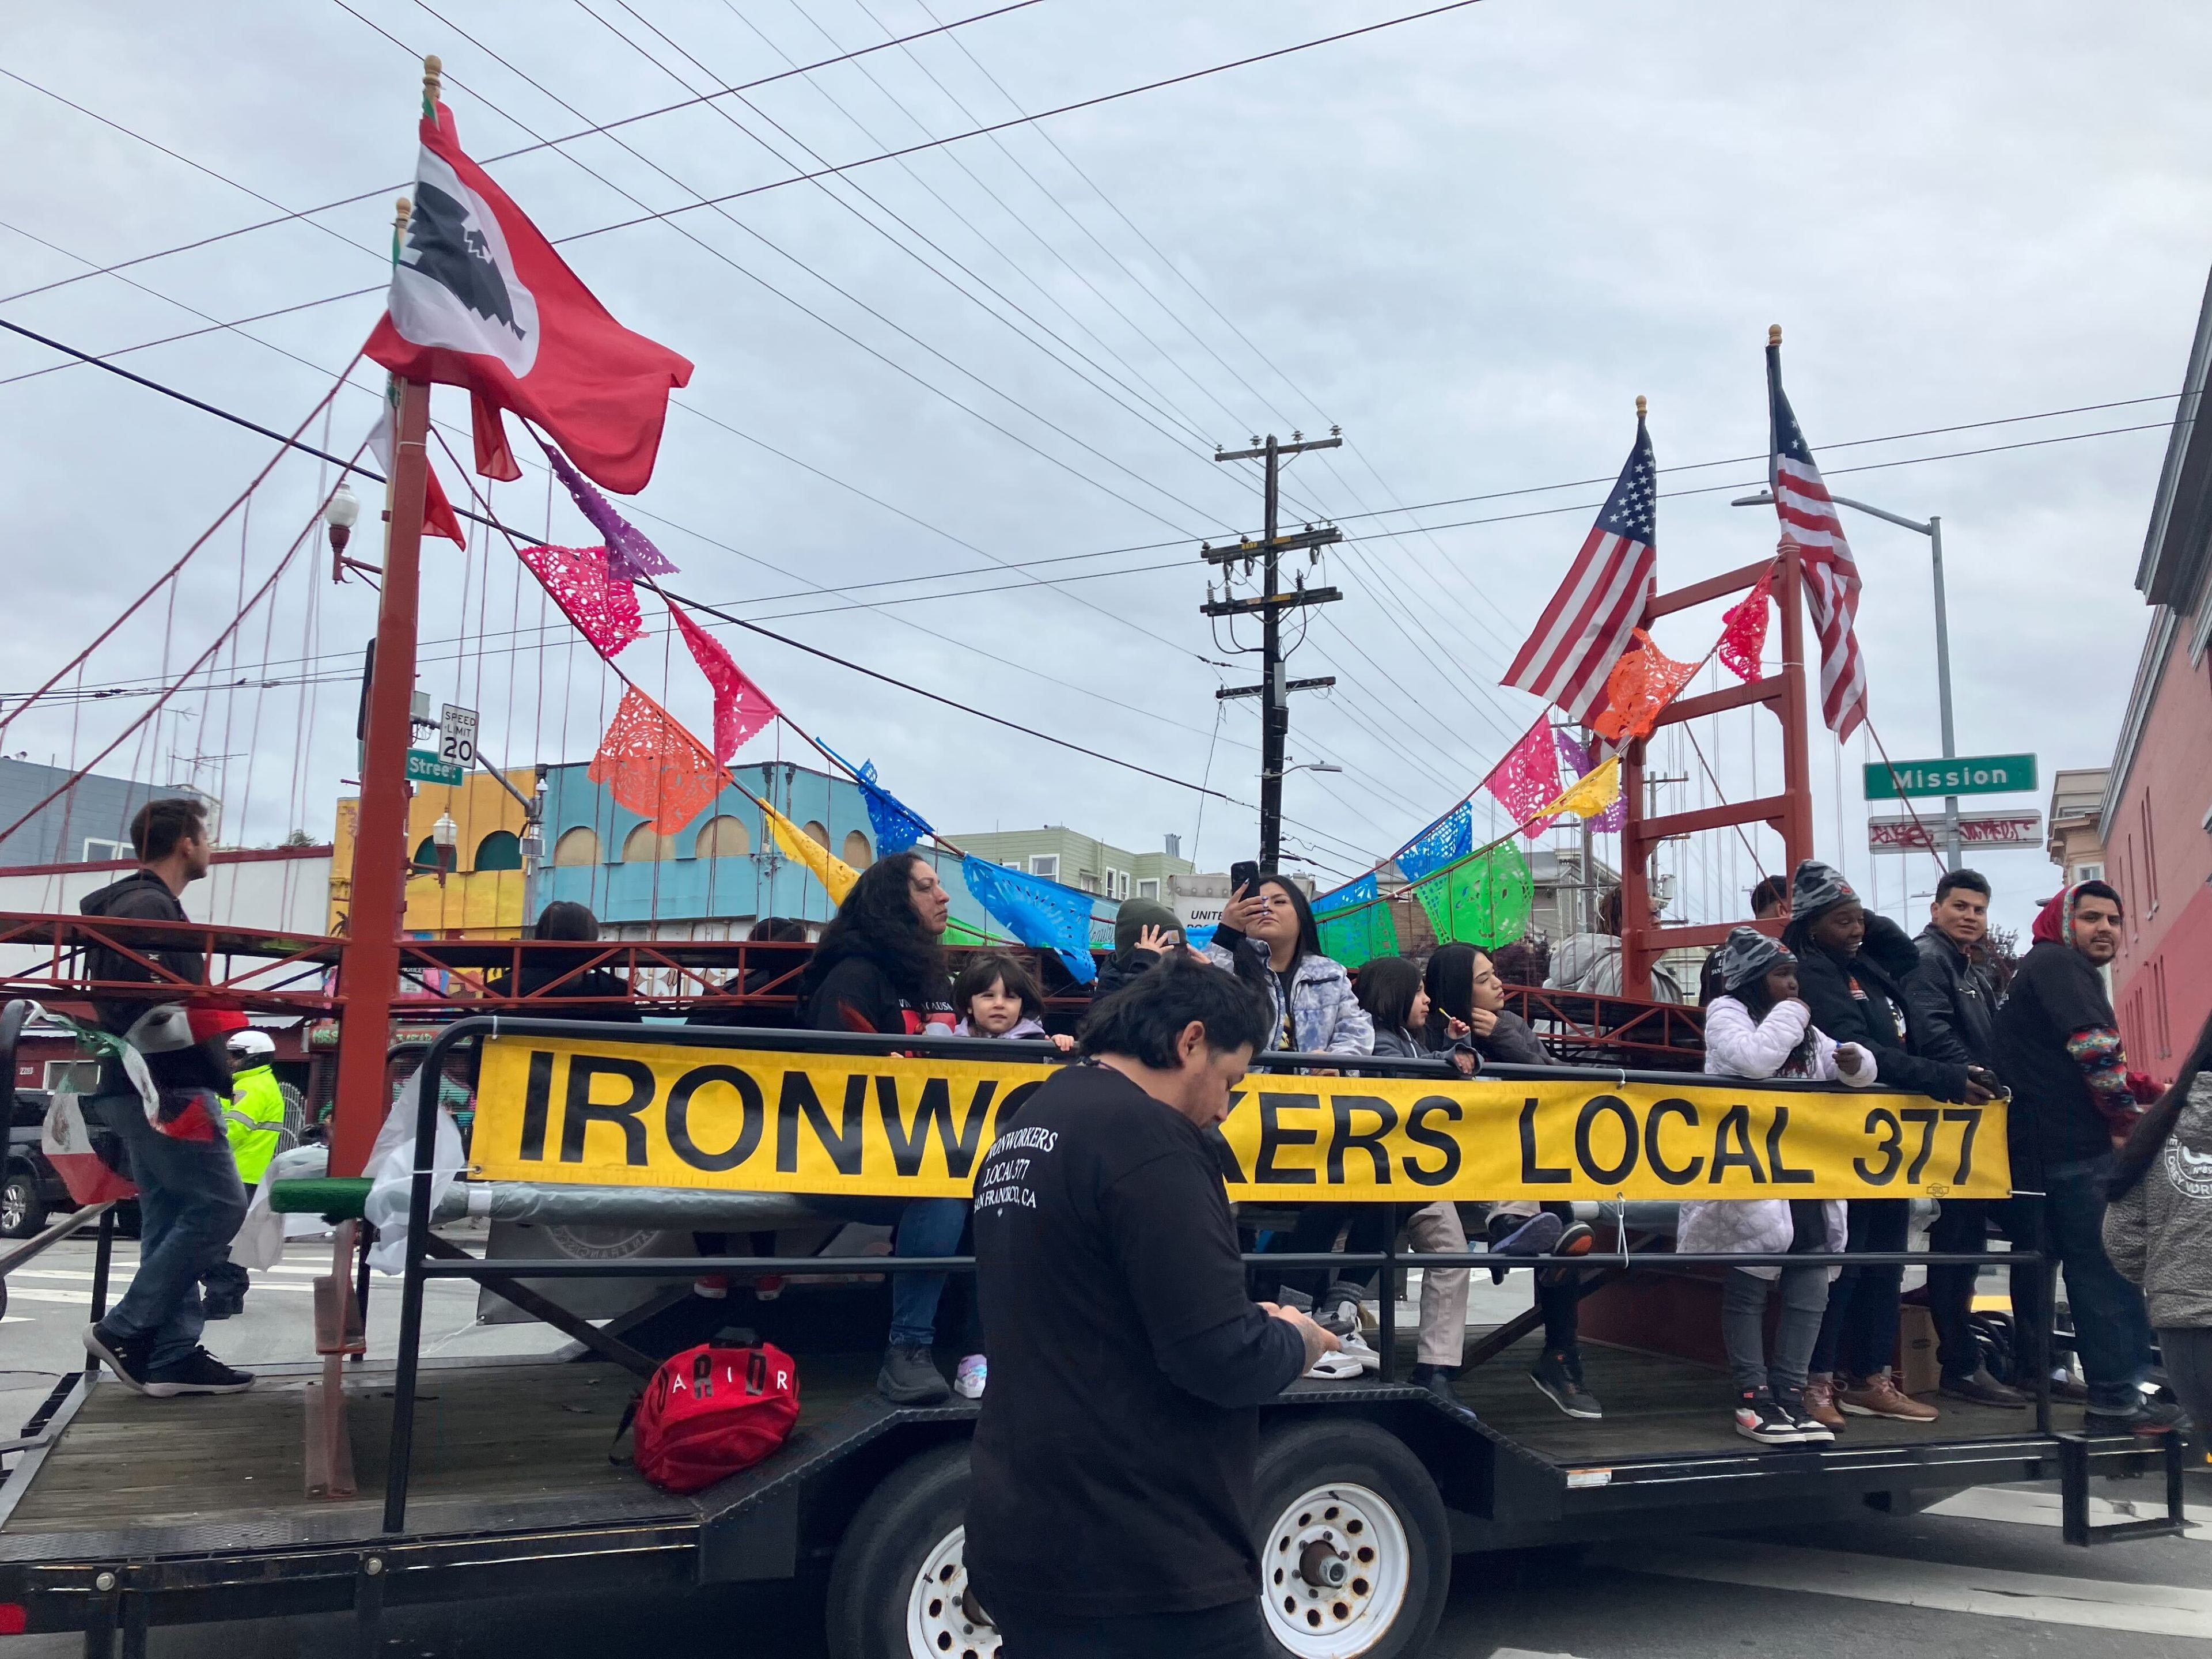 A parade float with people, flags, and a "IRONWORKERS LOCAL 377" banner, moving through a street.